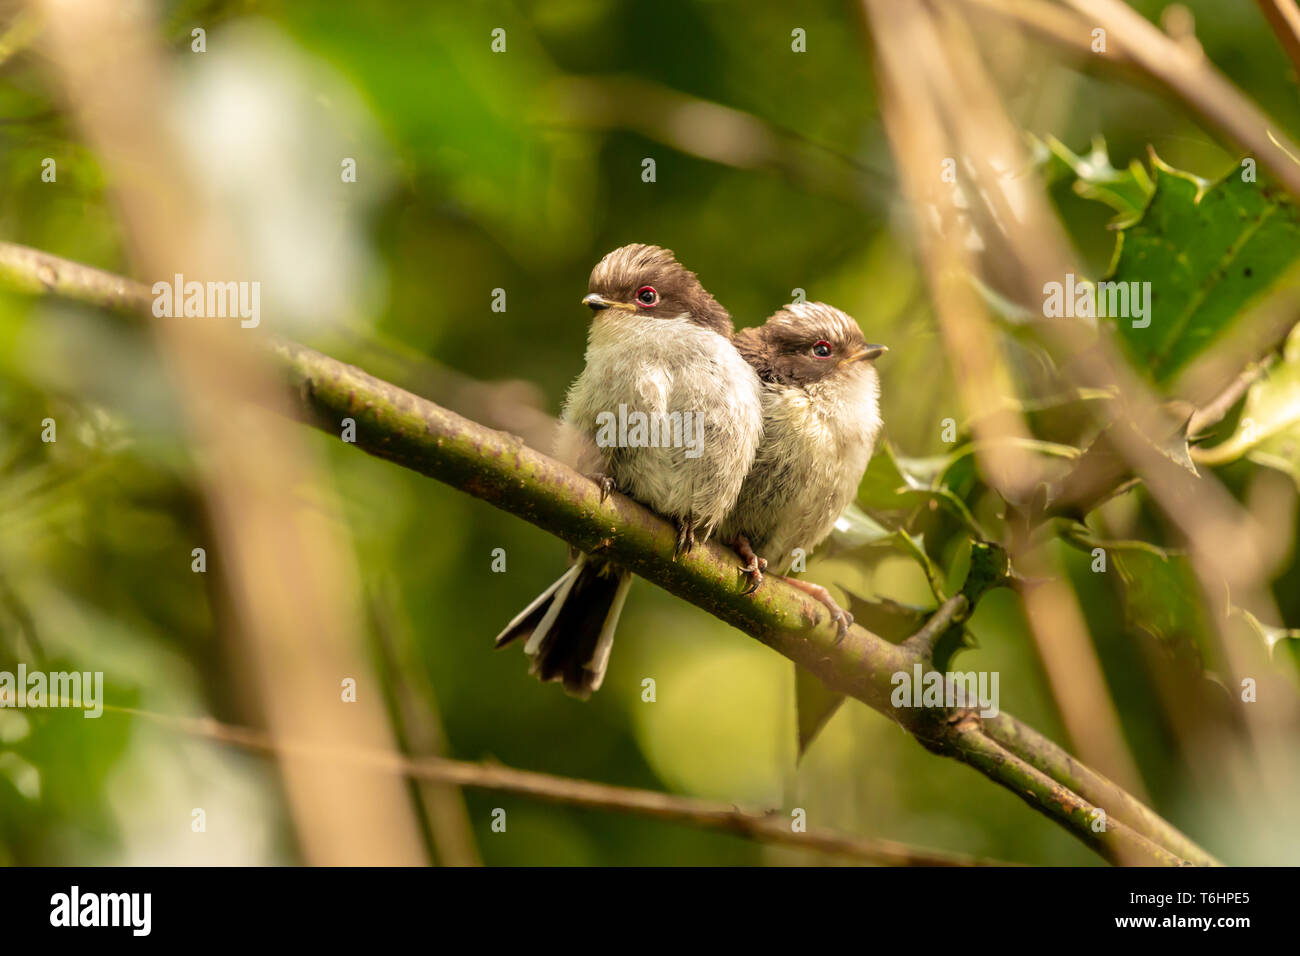 Colour wildlife portrait of two juvenile Long-tailed tits side-by-side (Aegithalos caudatus) which moments before photo had left their nest for the fi Stock Photo